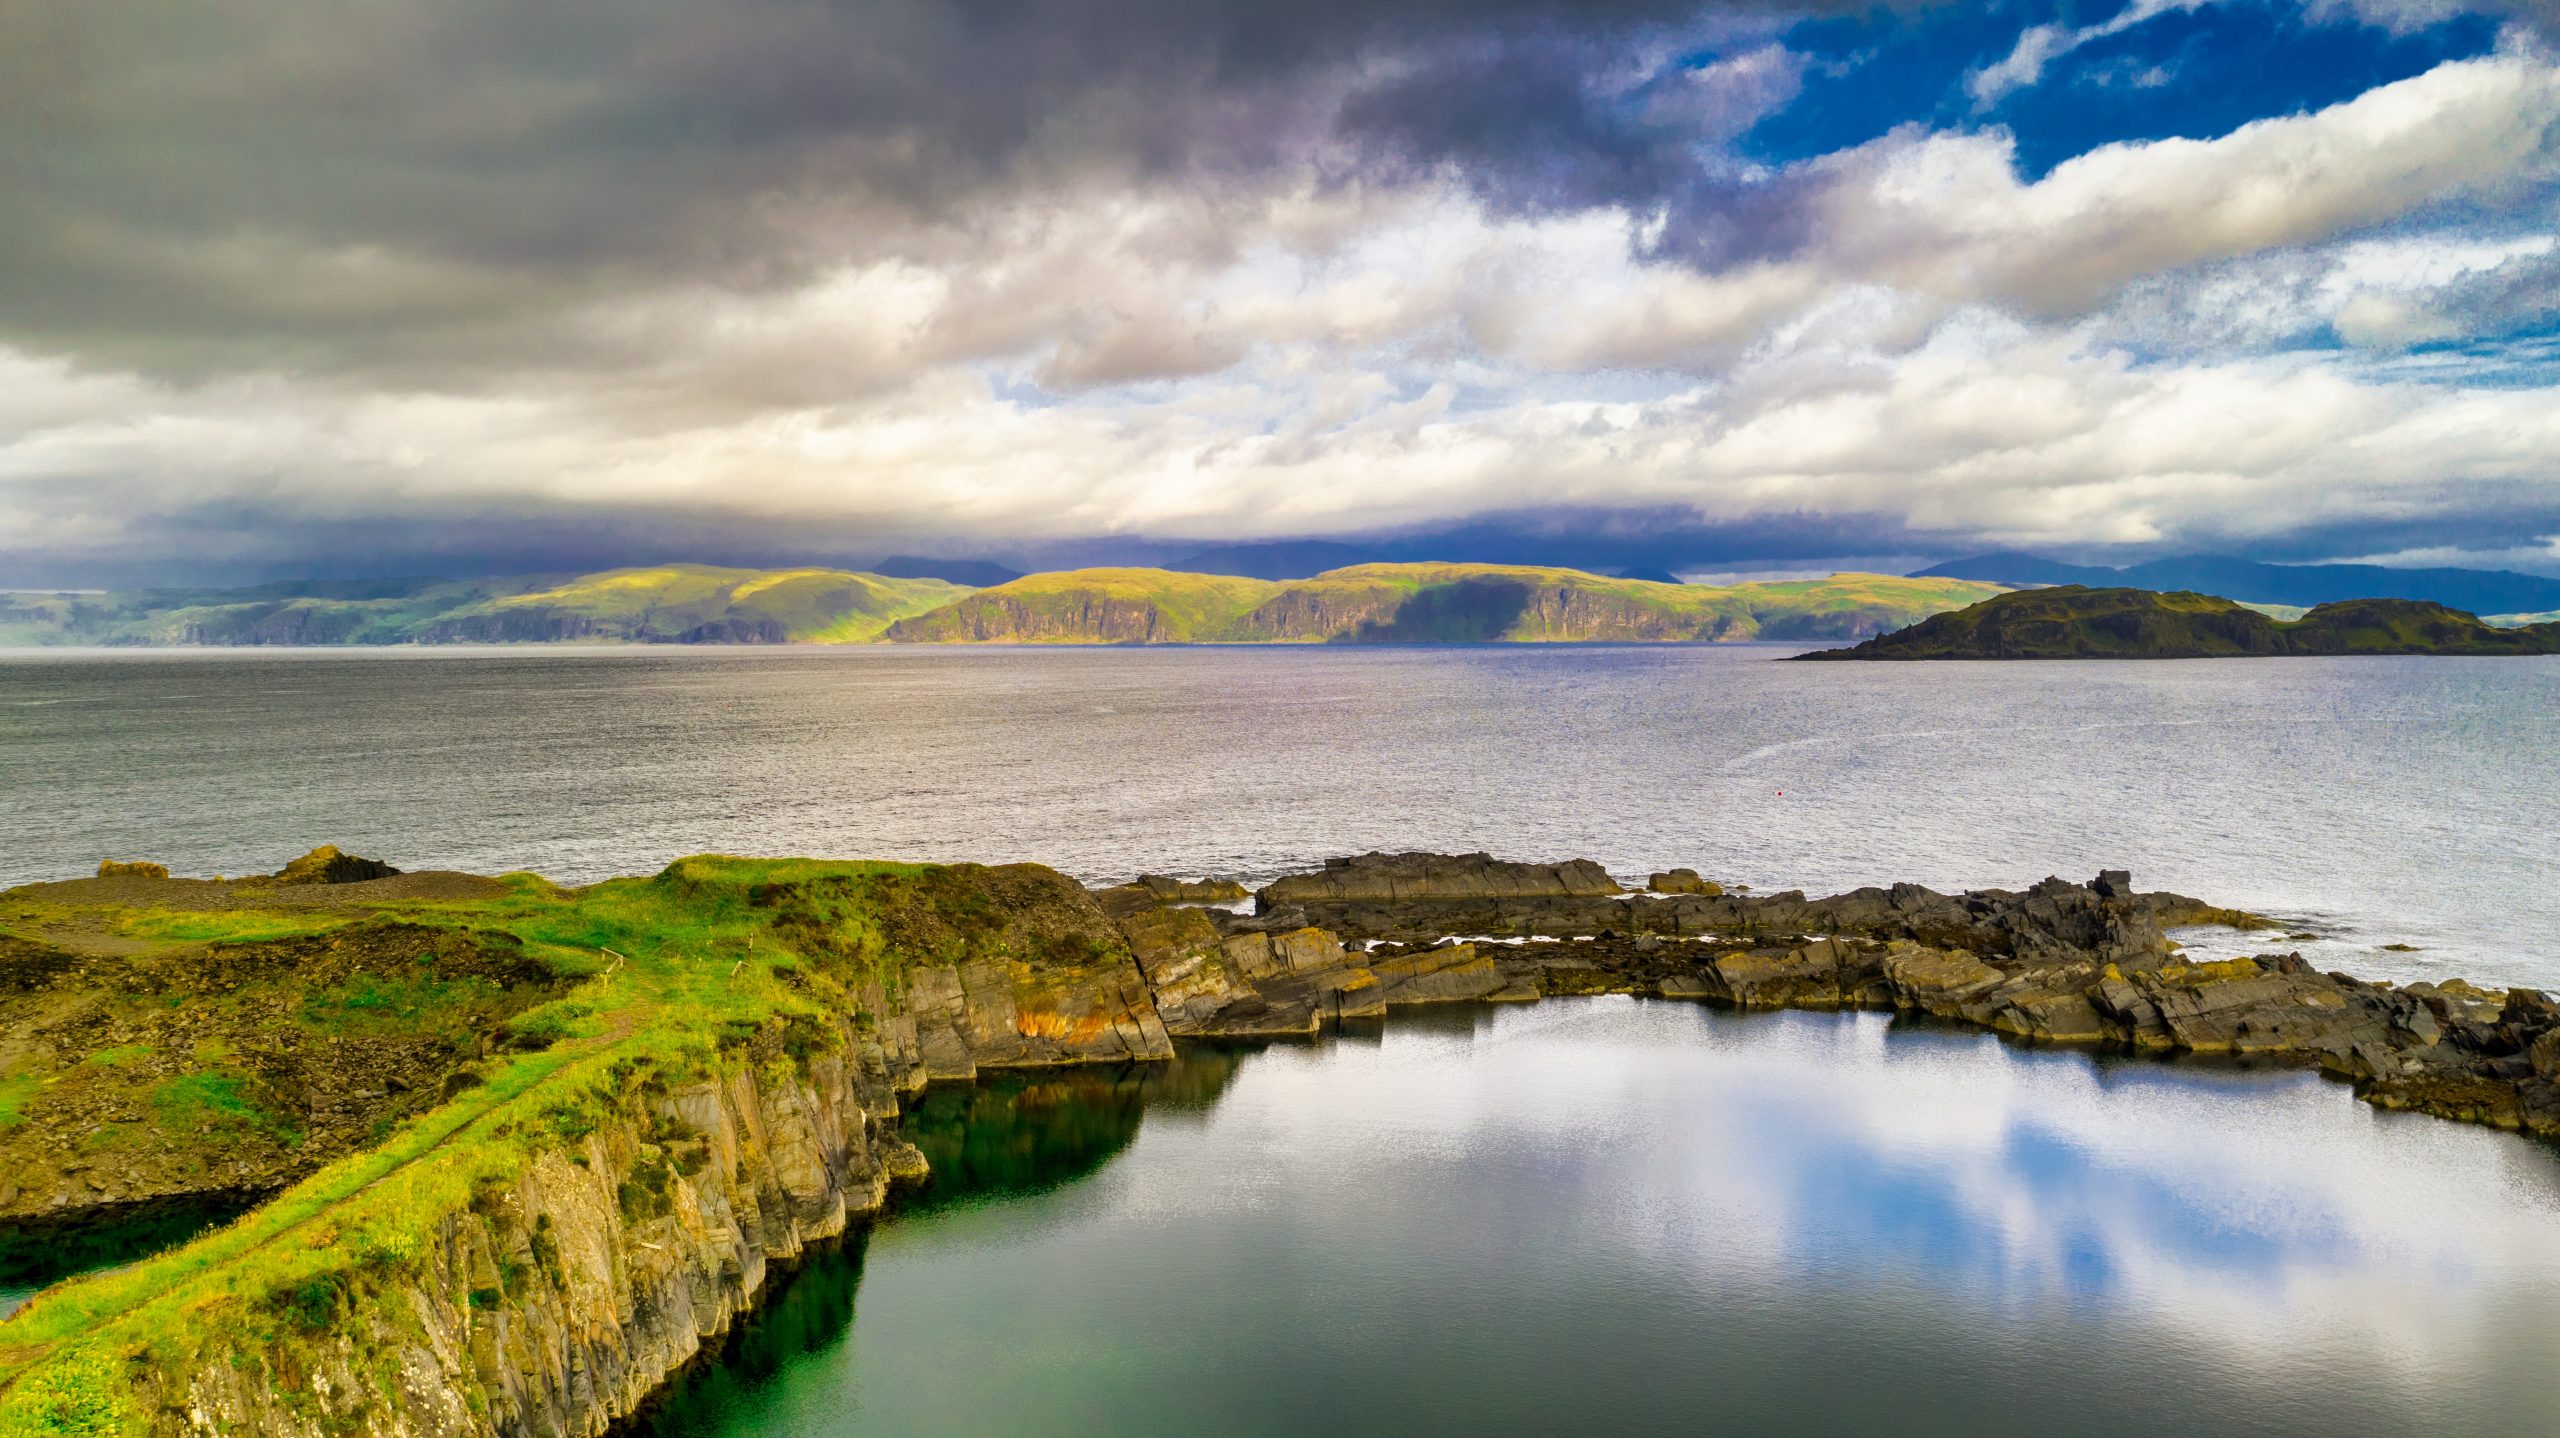 Things to do in Oban - Visit Easdale Island for a taste of island life